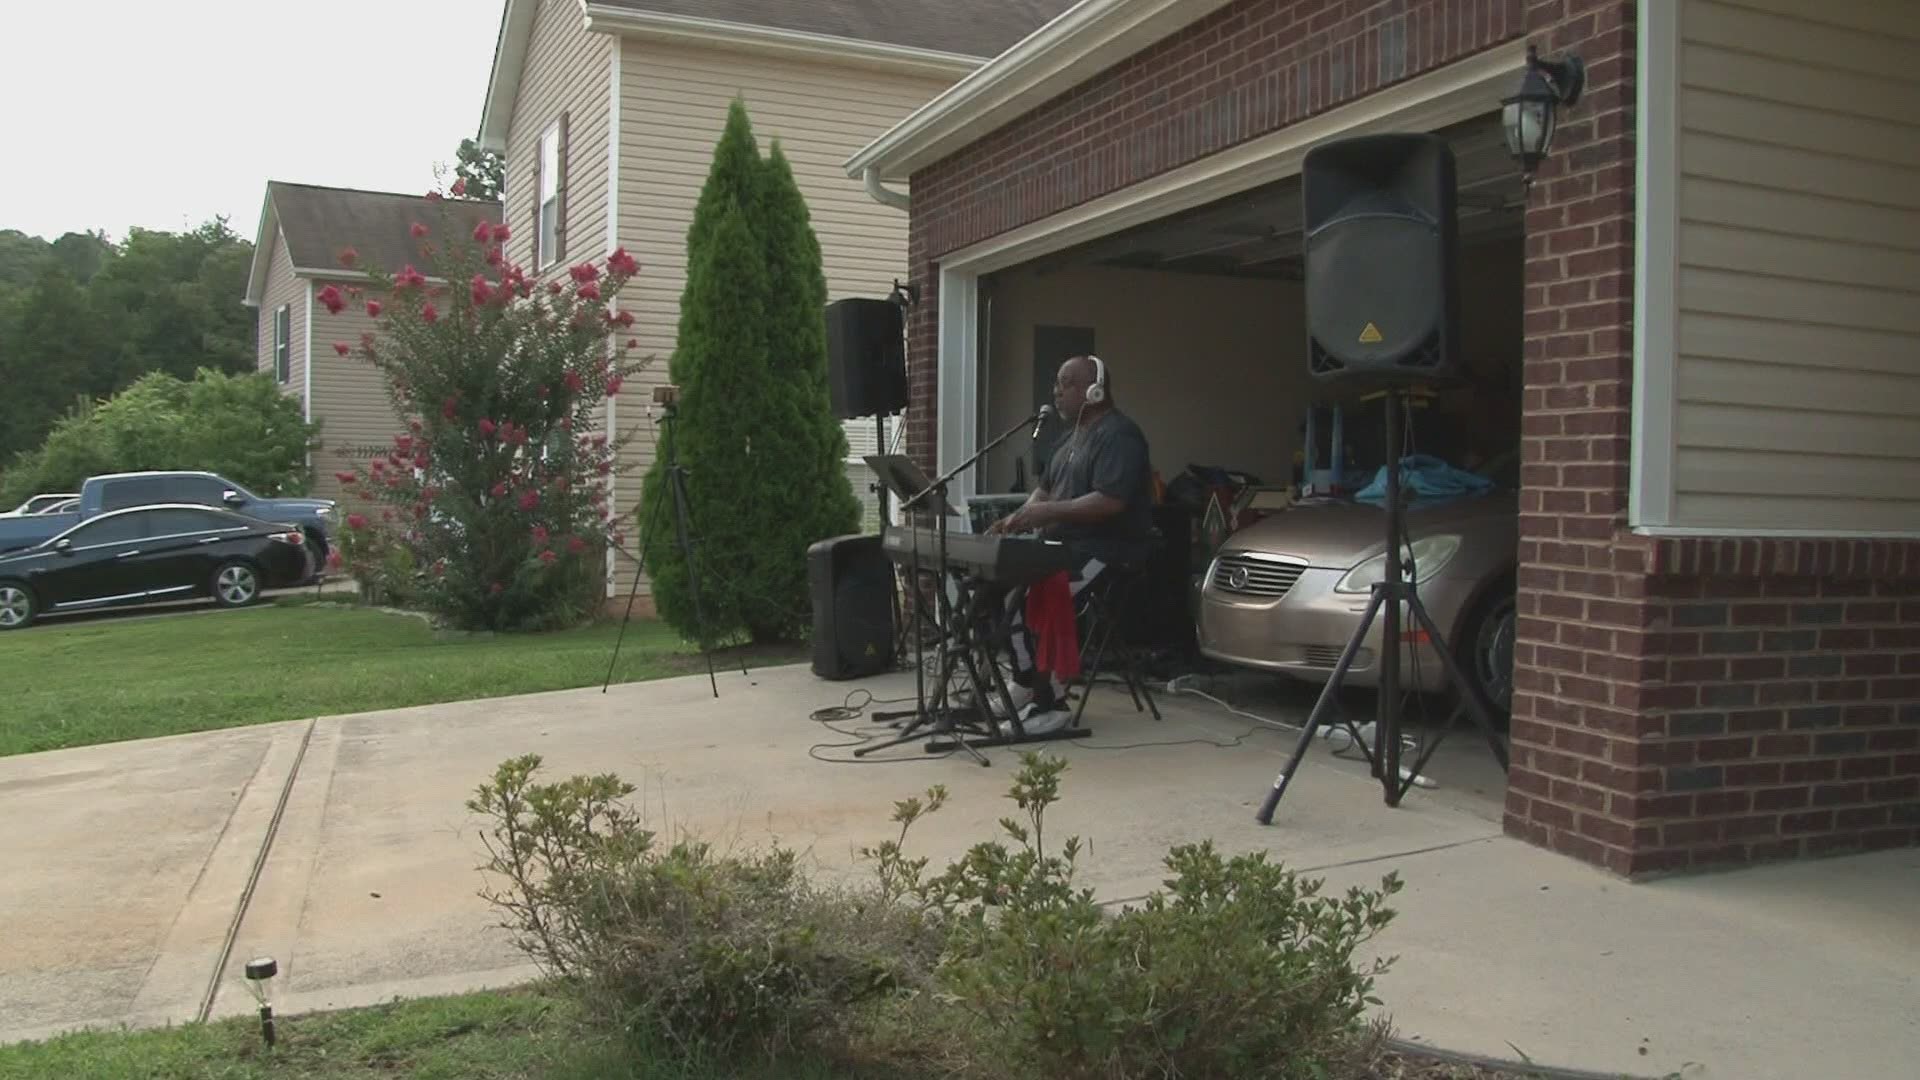 The musician played for his neighbors, and for an online audience, Friday night.